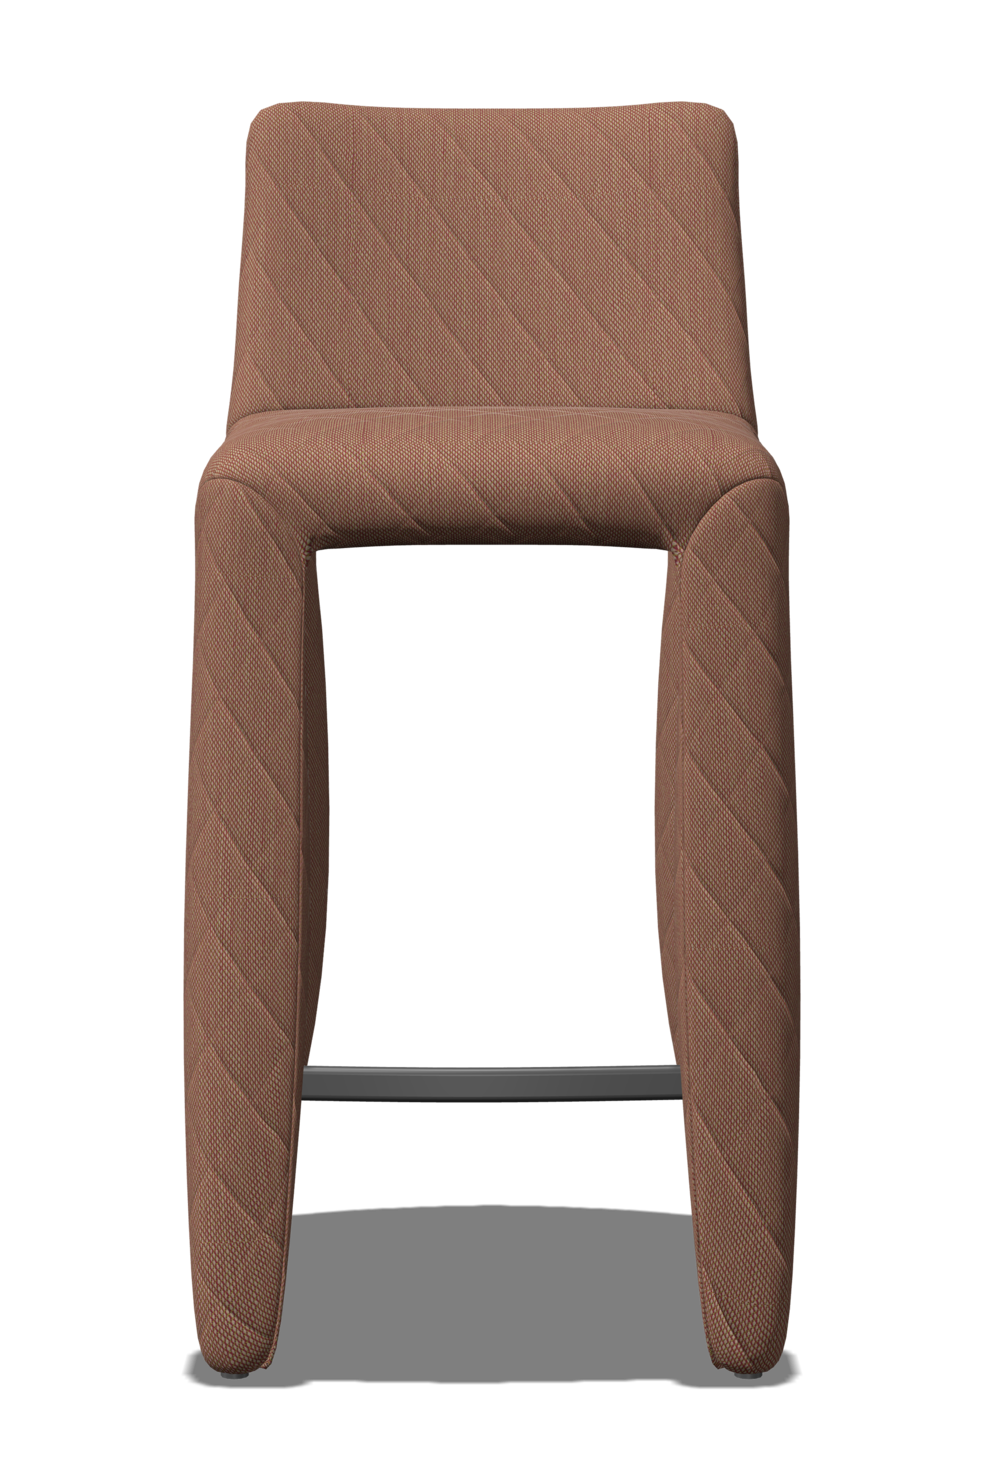 Monster Barstool low stitching multicolour